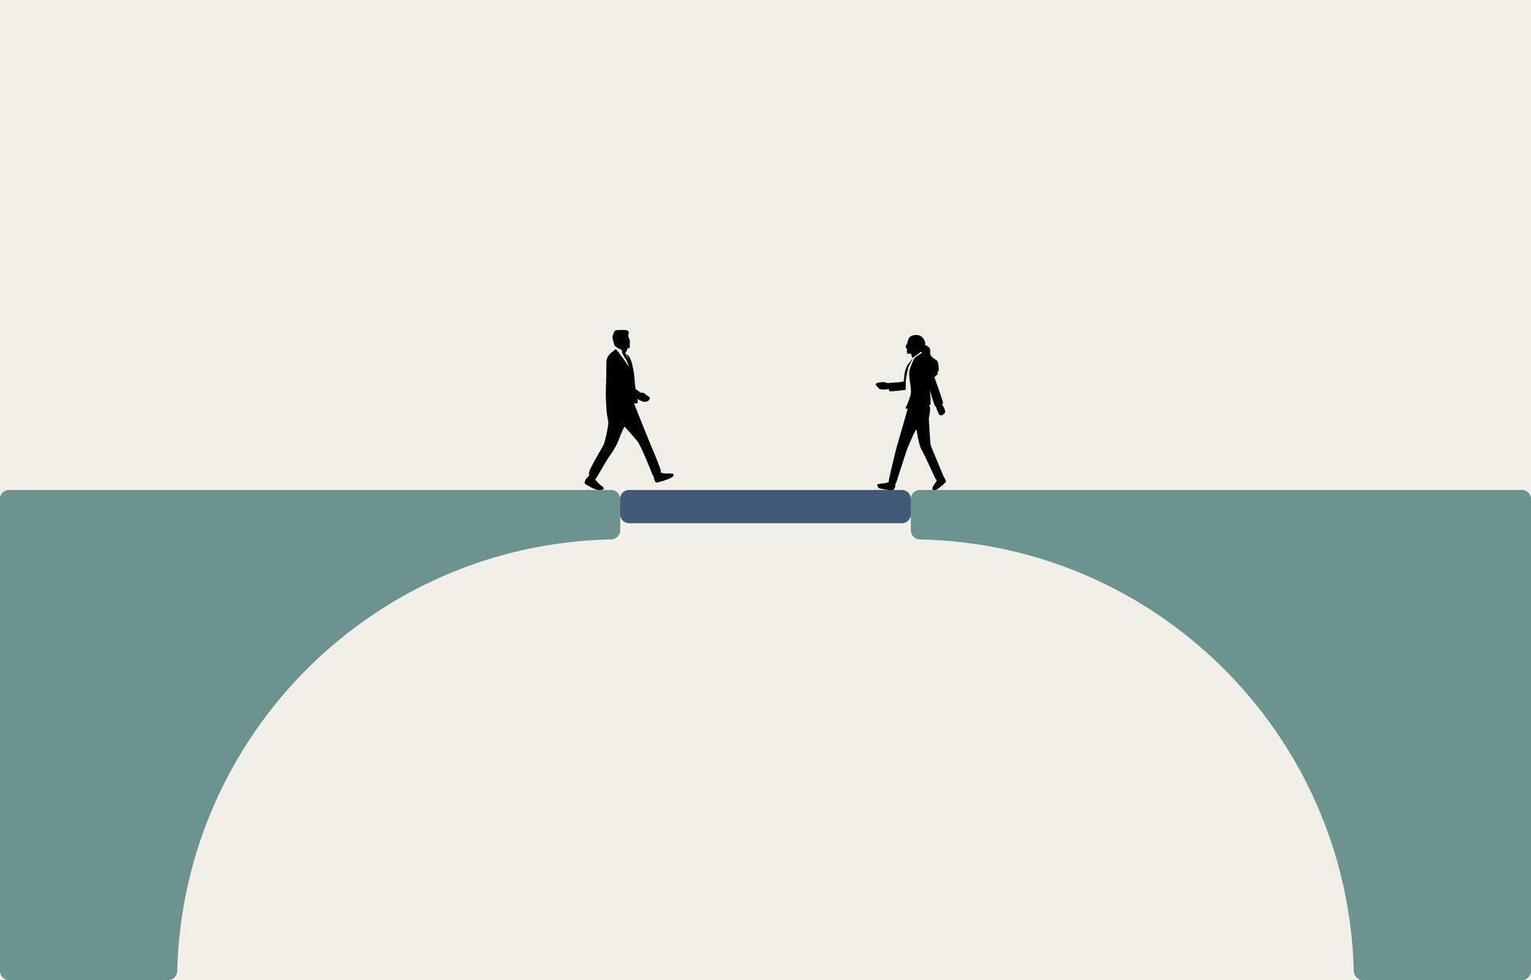 Business connection or partnership concept, businessman and businesswoman walking toward each other on connecting road, vector illustration.